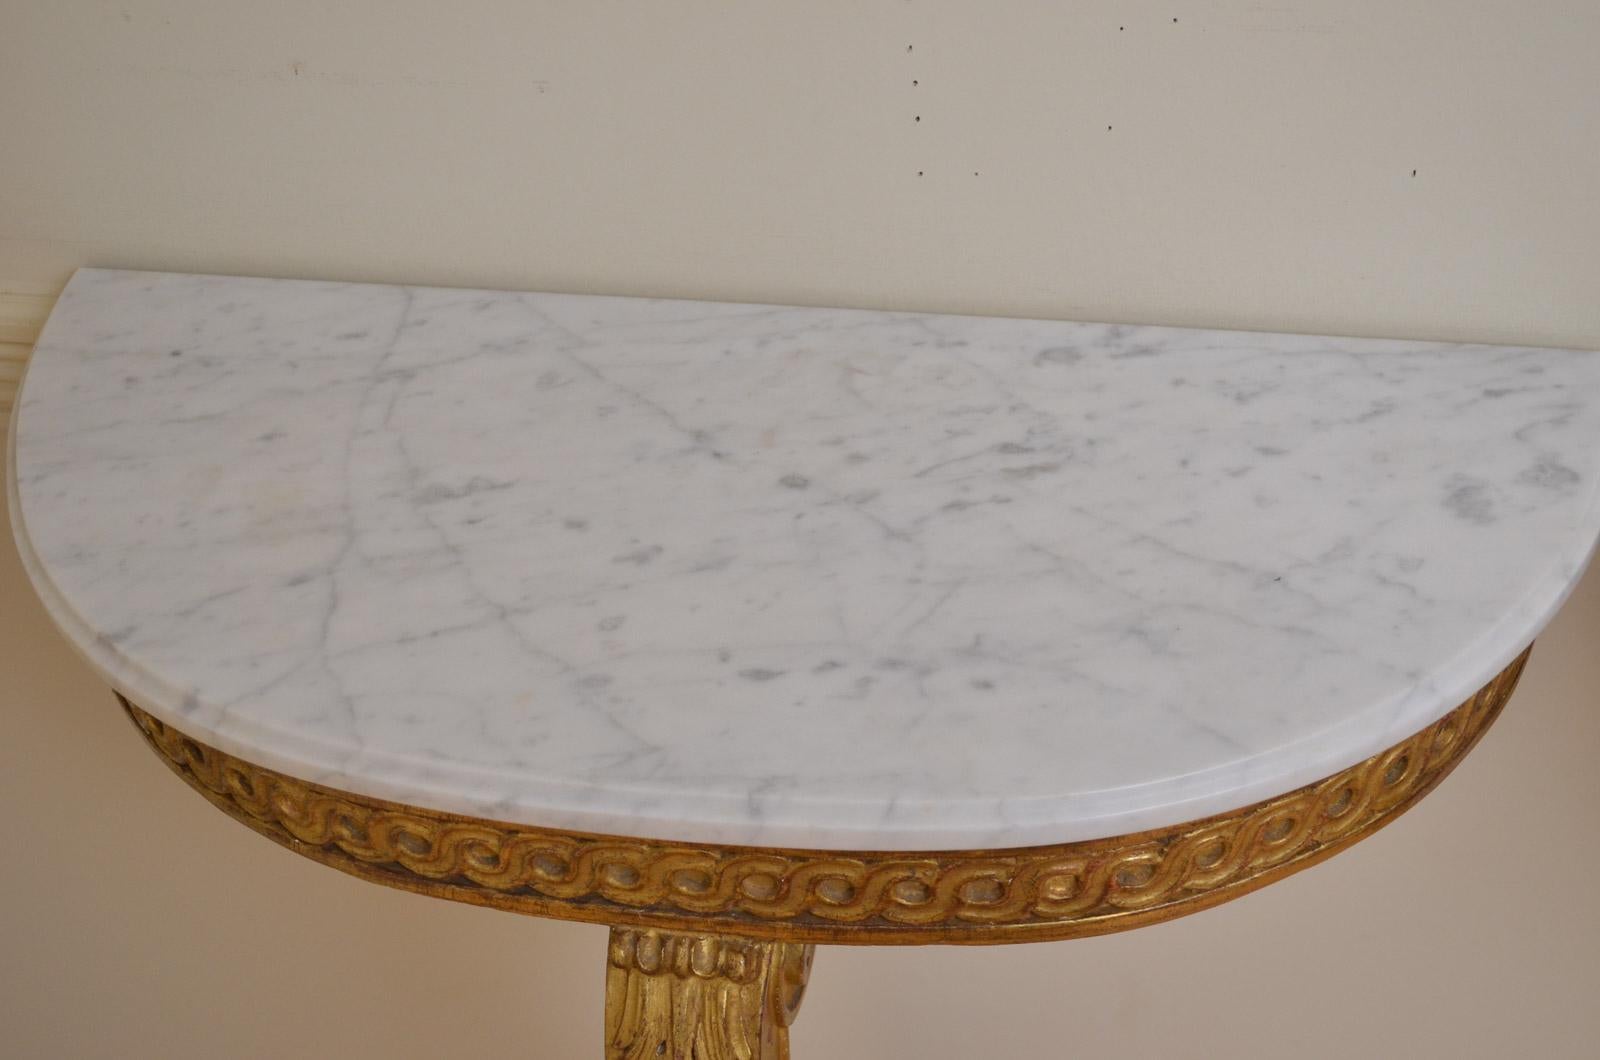 Sn4350, pair of gilded console table of demilune outline, each having original white and veined marble top and shallow frieze and finely carved cabriole leg. This pair of antique console tables is in excellent original condition throughout, circa